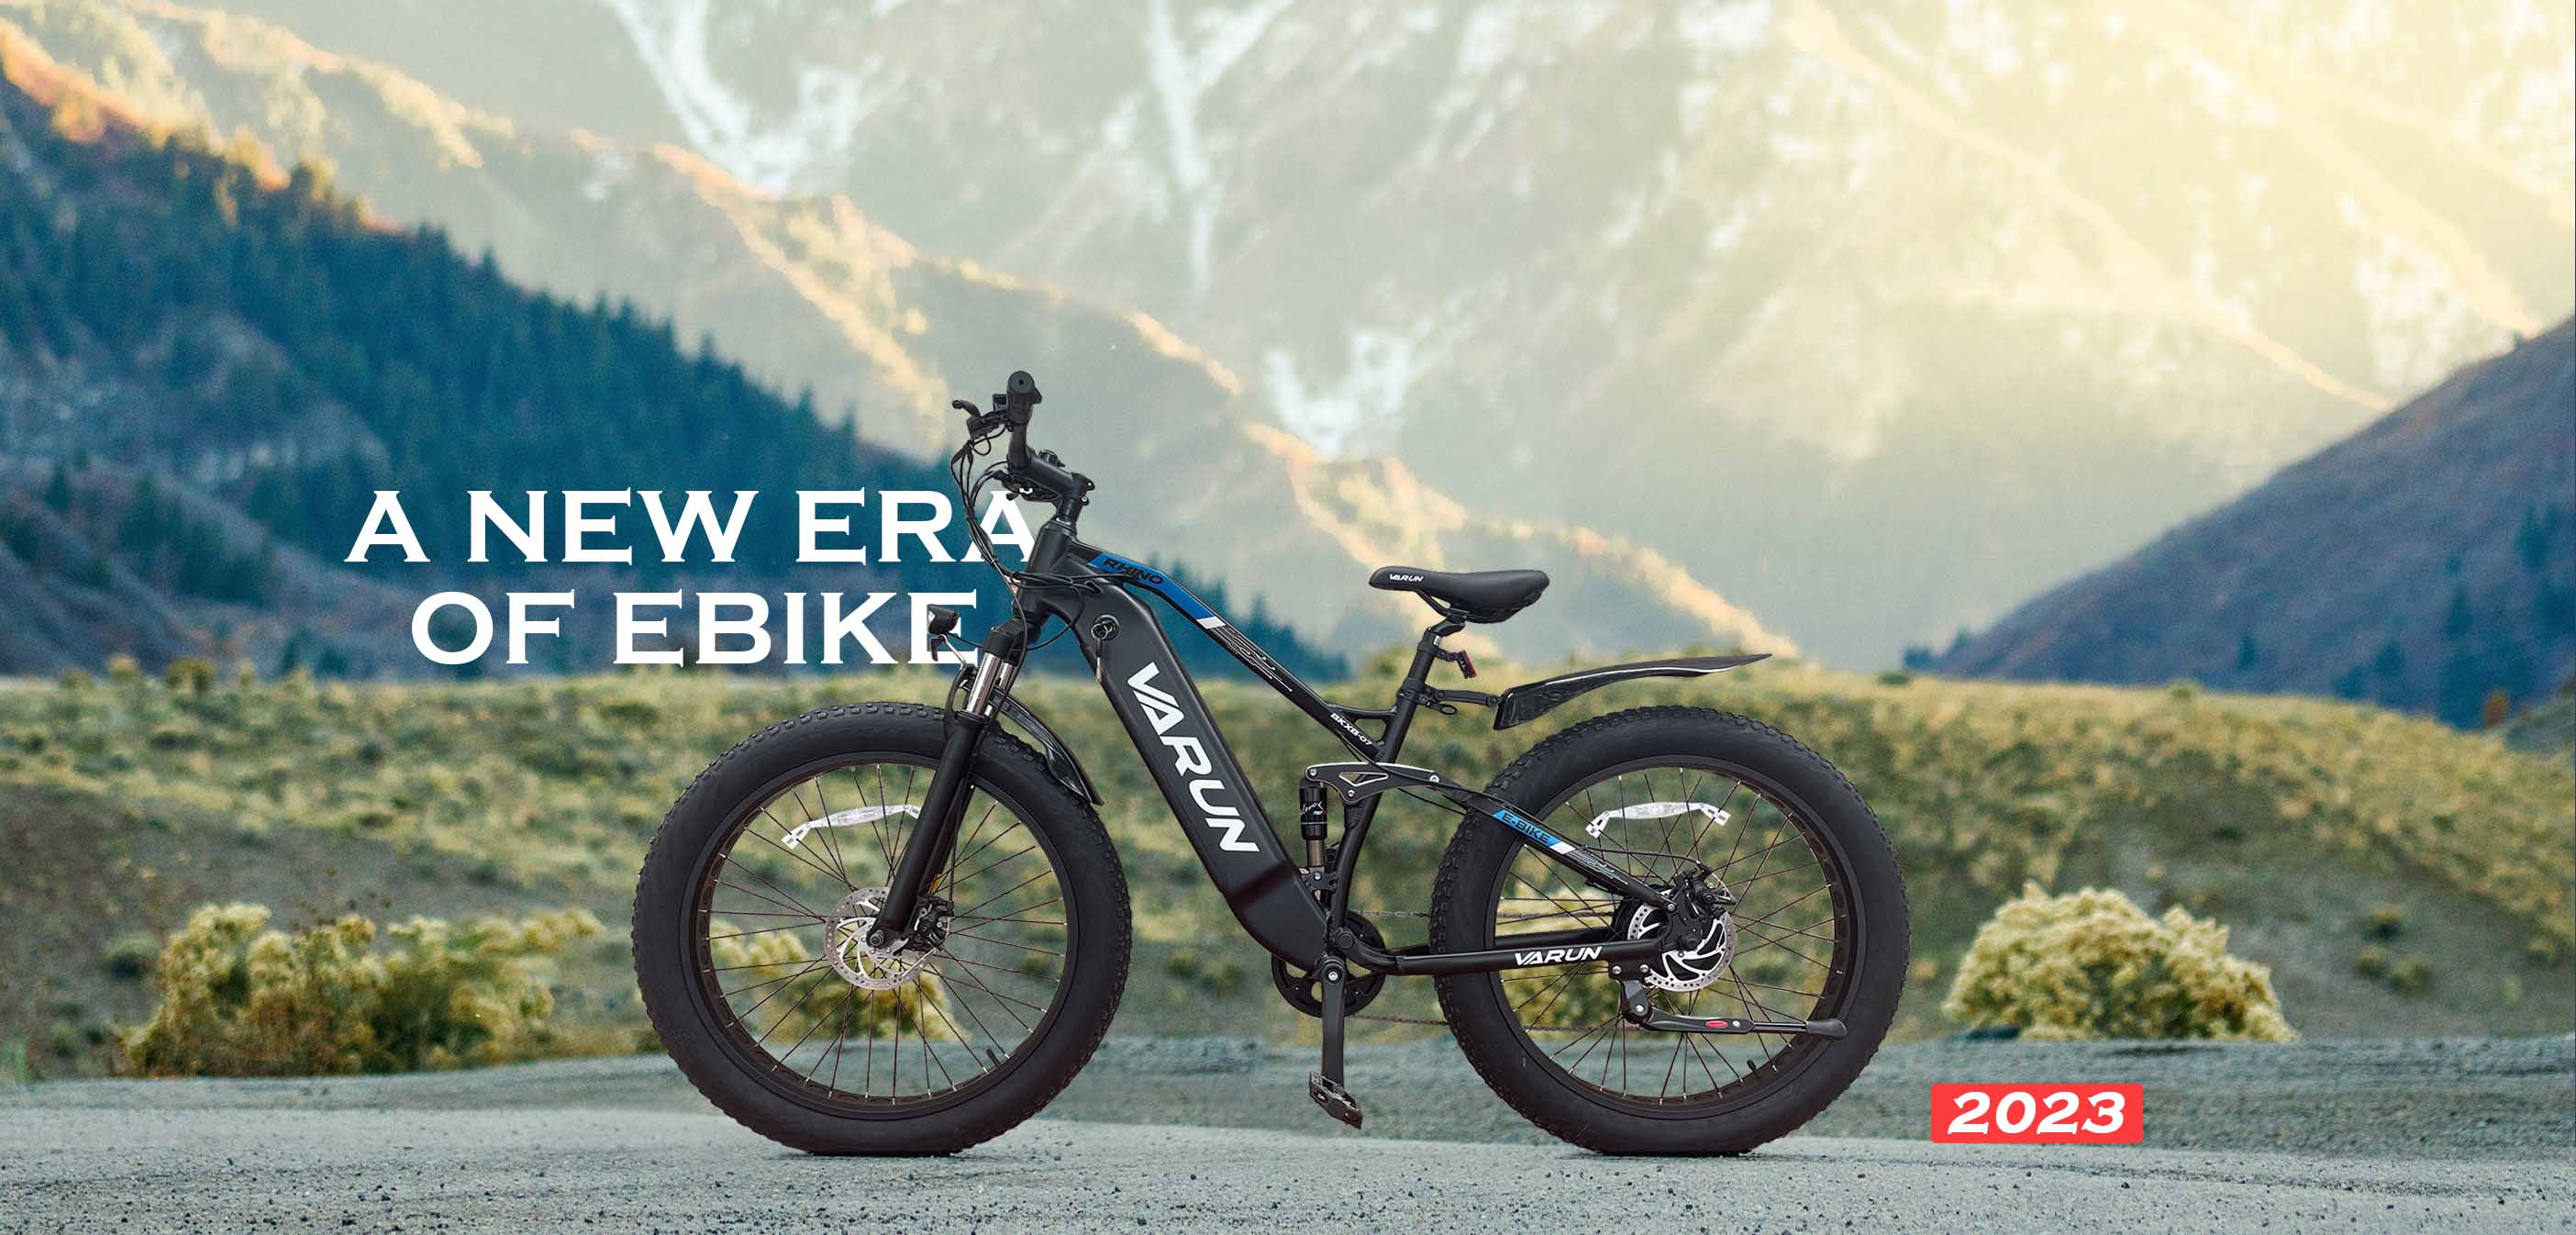 We are a group of people who genuinely love electric bicycles, and varunebike.com embodies our passion.